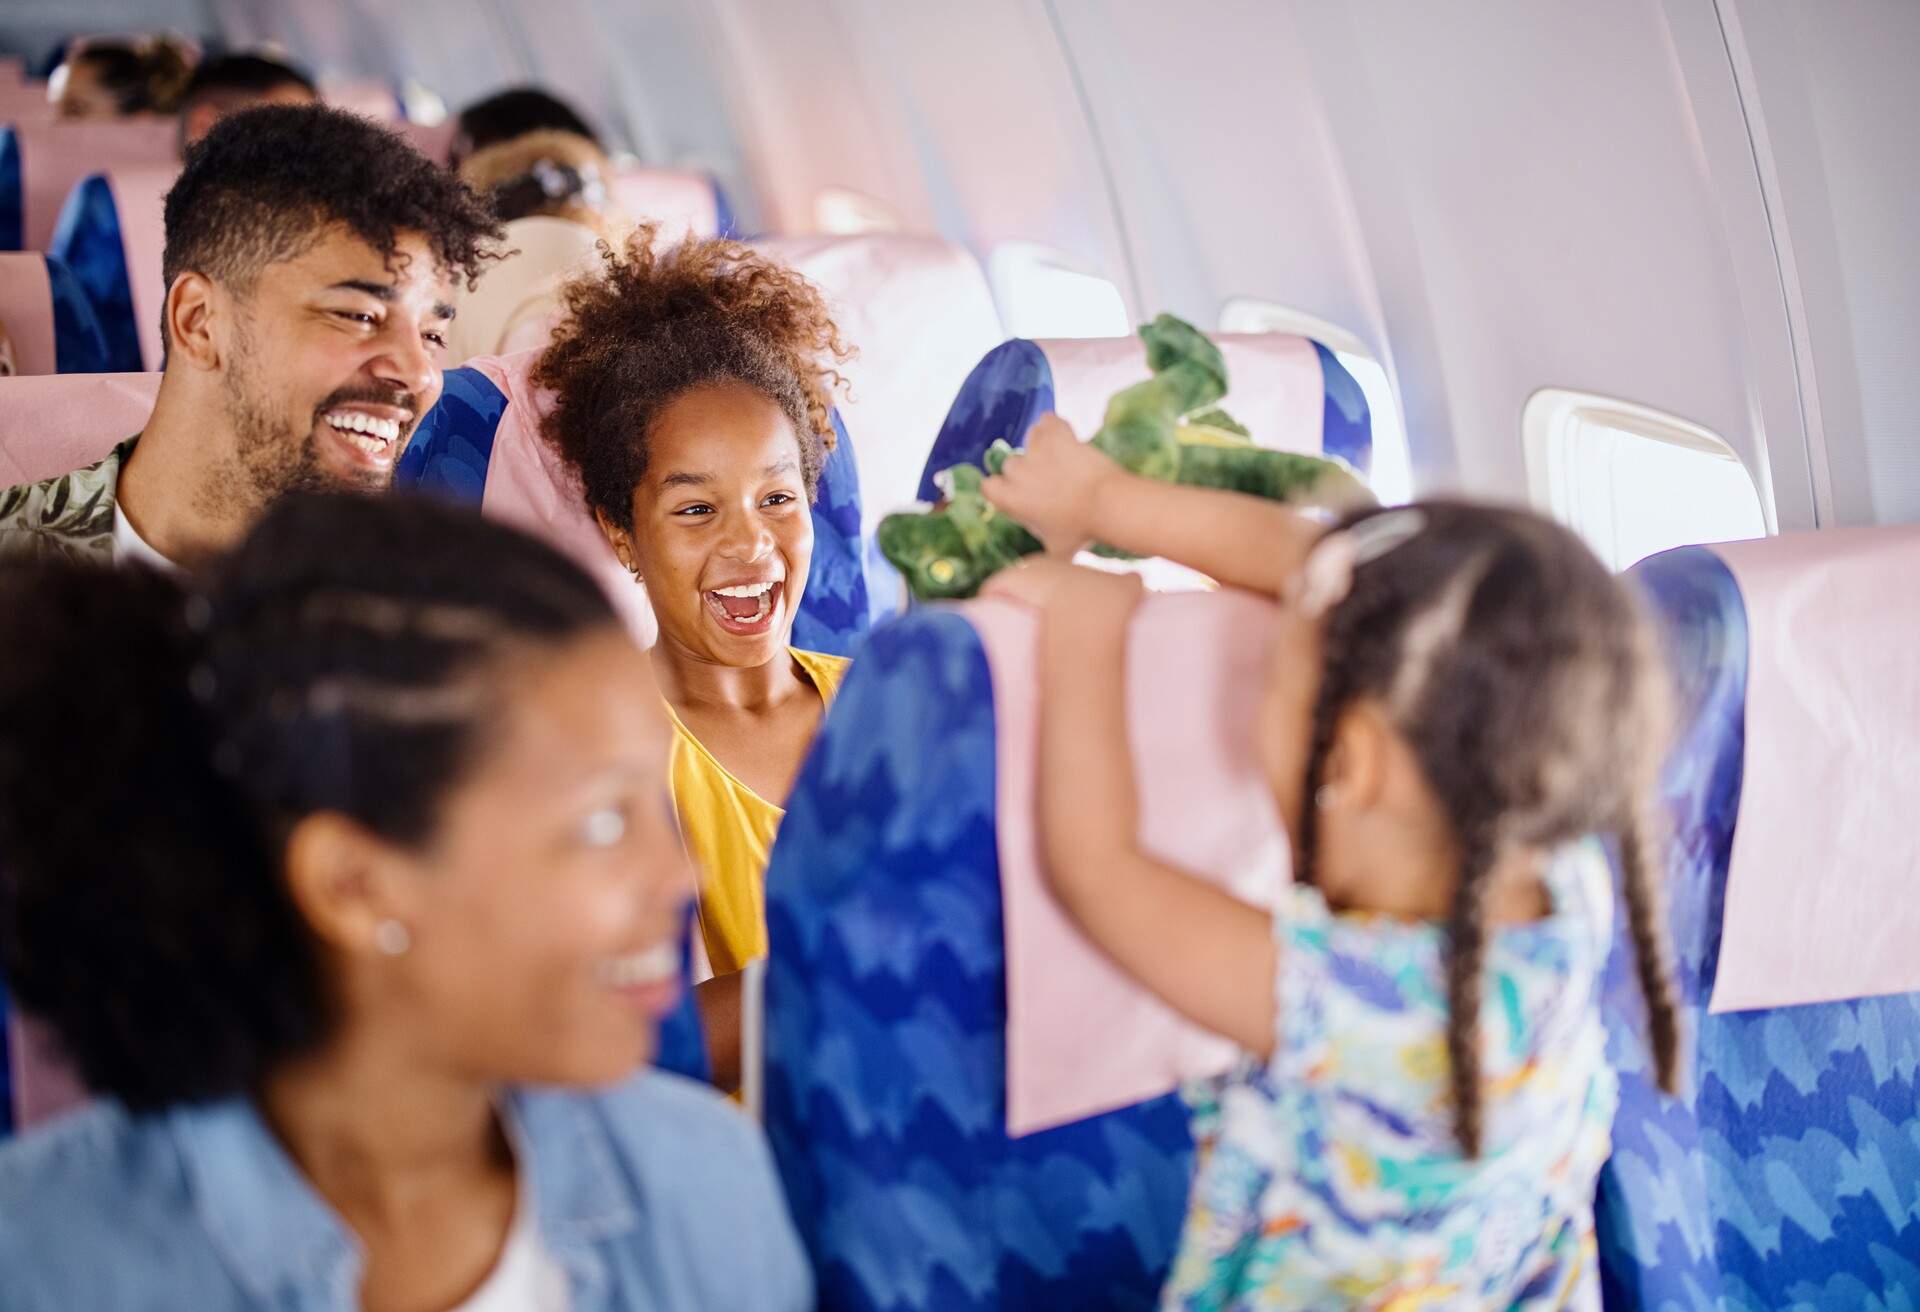 A happy family with a child sits inside an aeroplane.